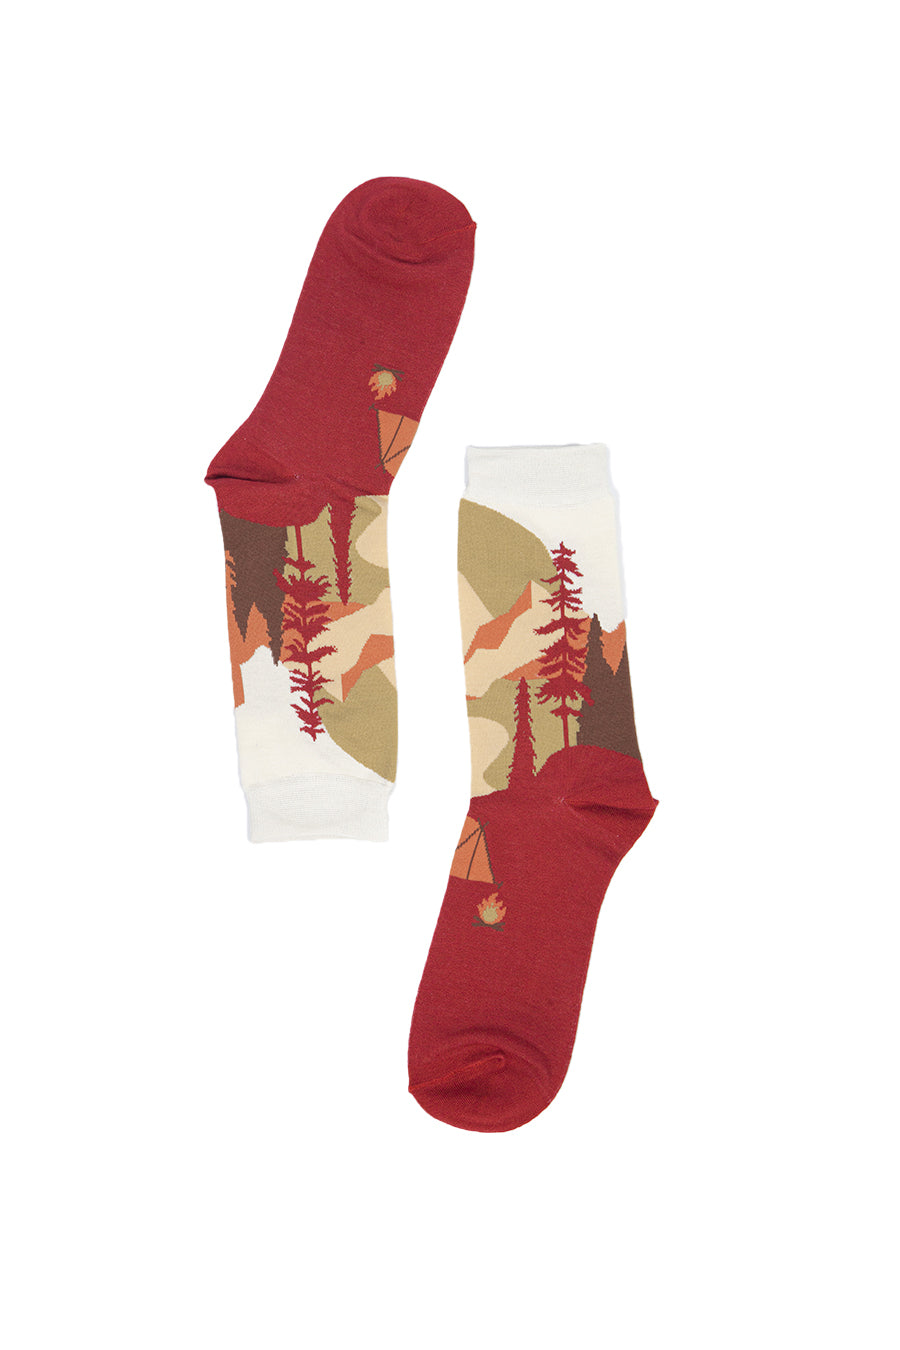 burnt orange bamboo socks with a tent and campfire scene